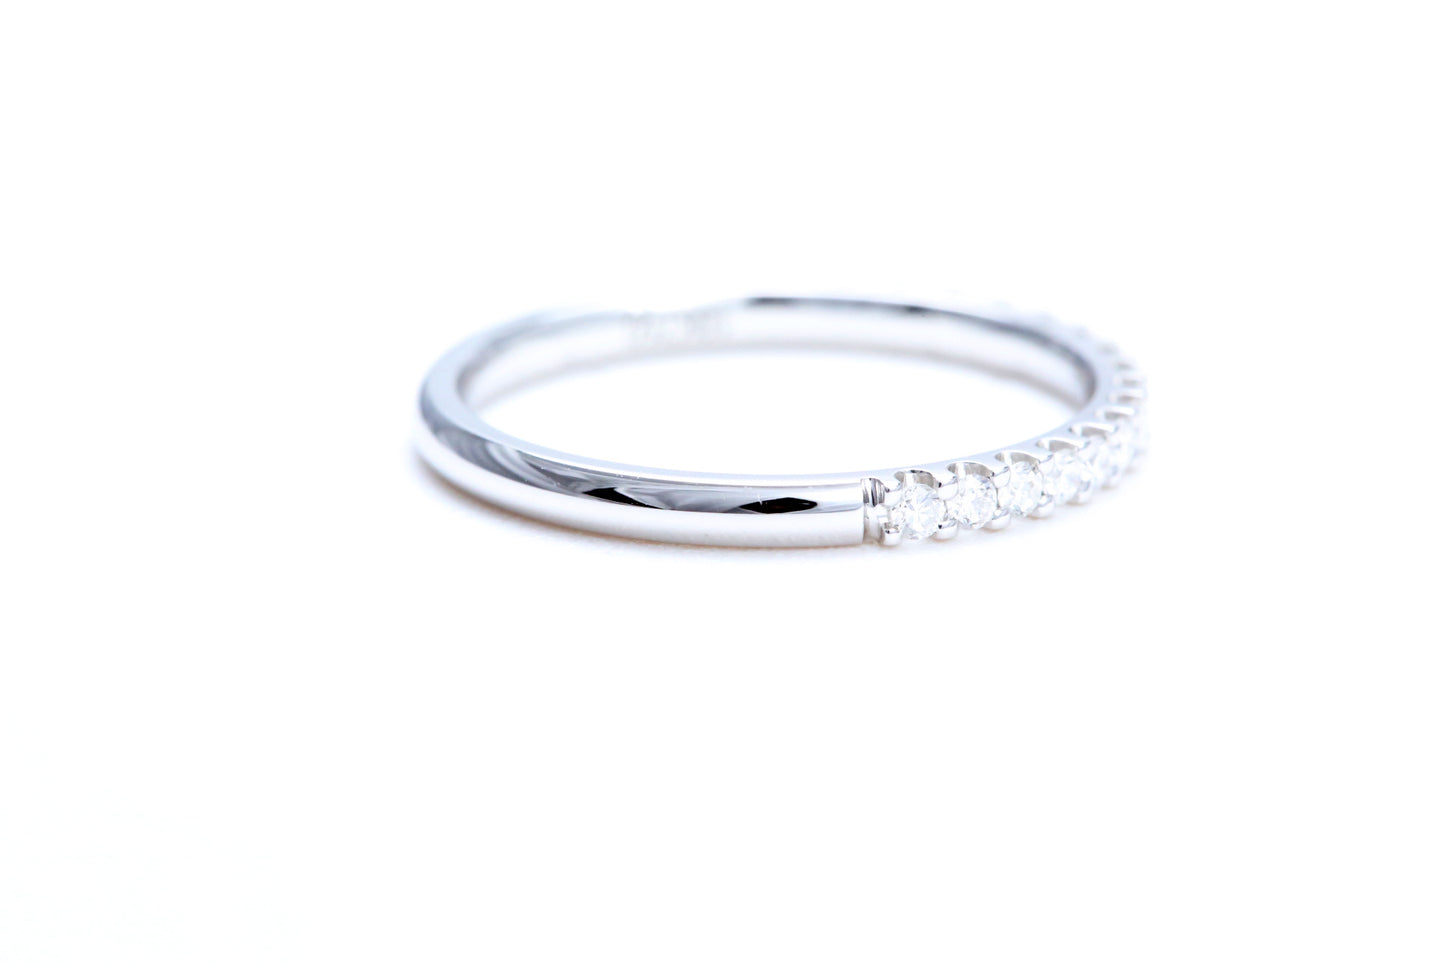 Minimalist Pavé Diamond Ring 1/4 of a carat total weight in 14K white gold